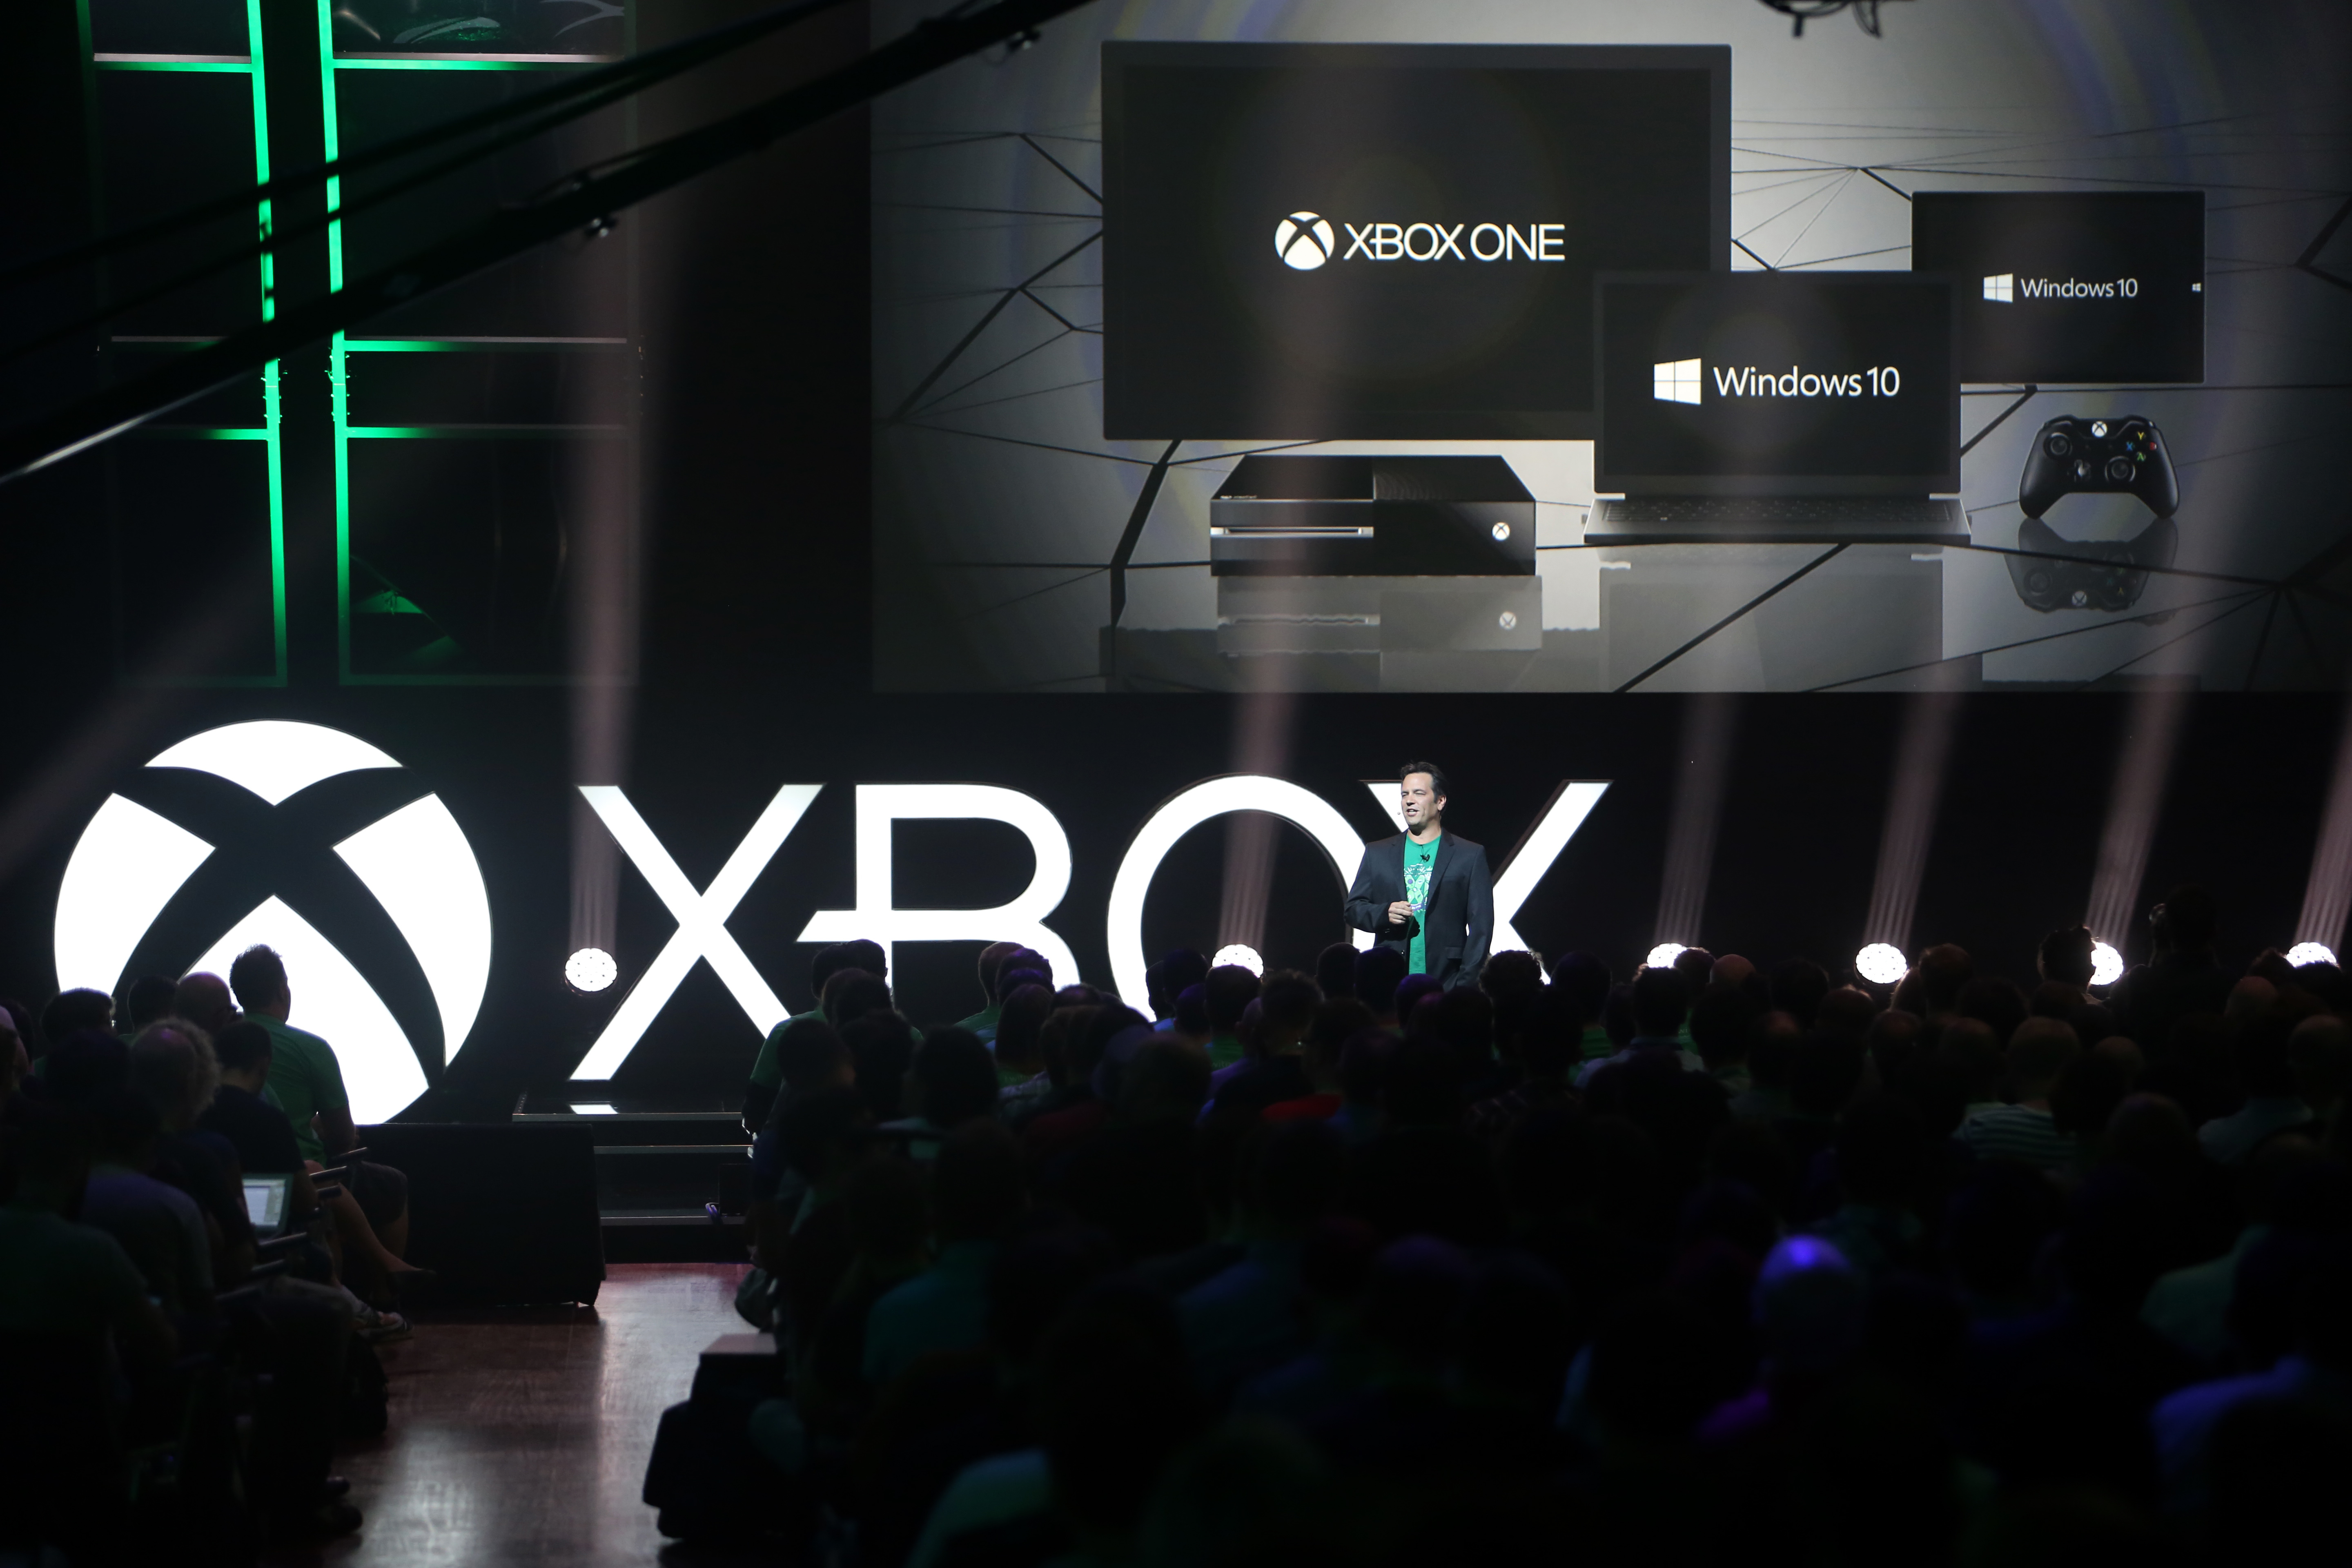 Phil Spencer on stage at Gamescom 2015